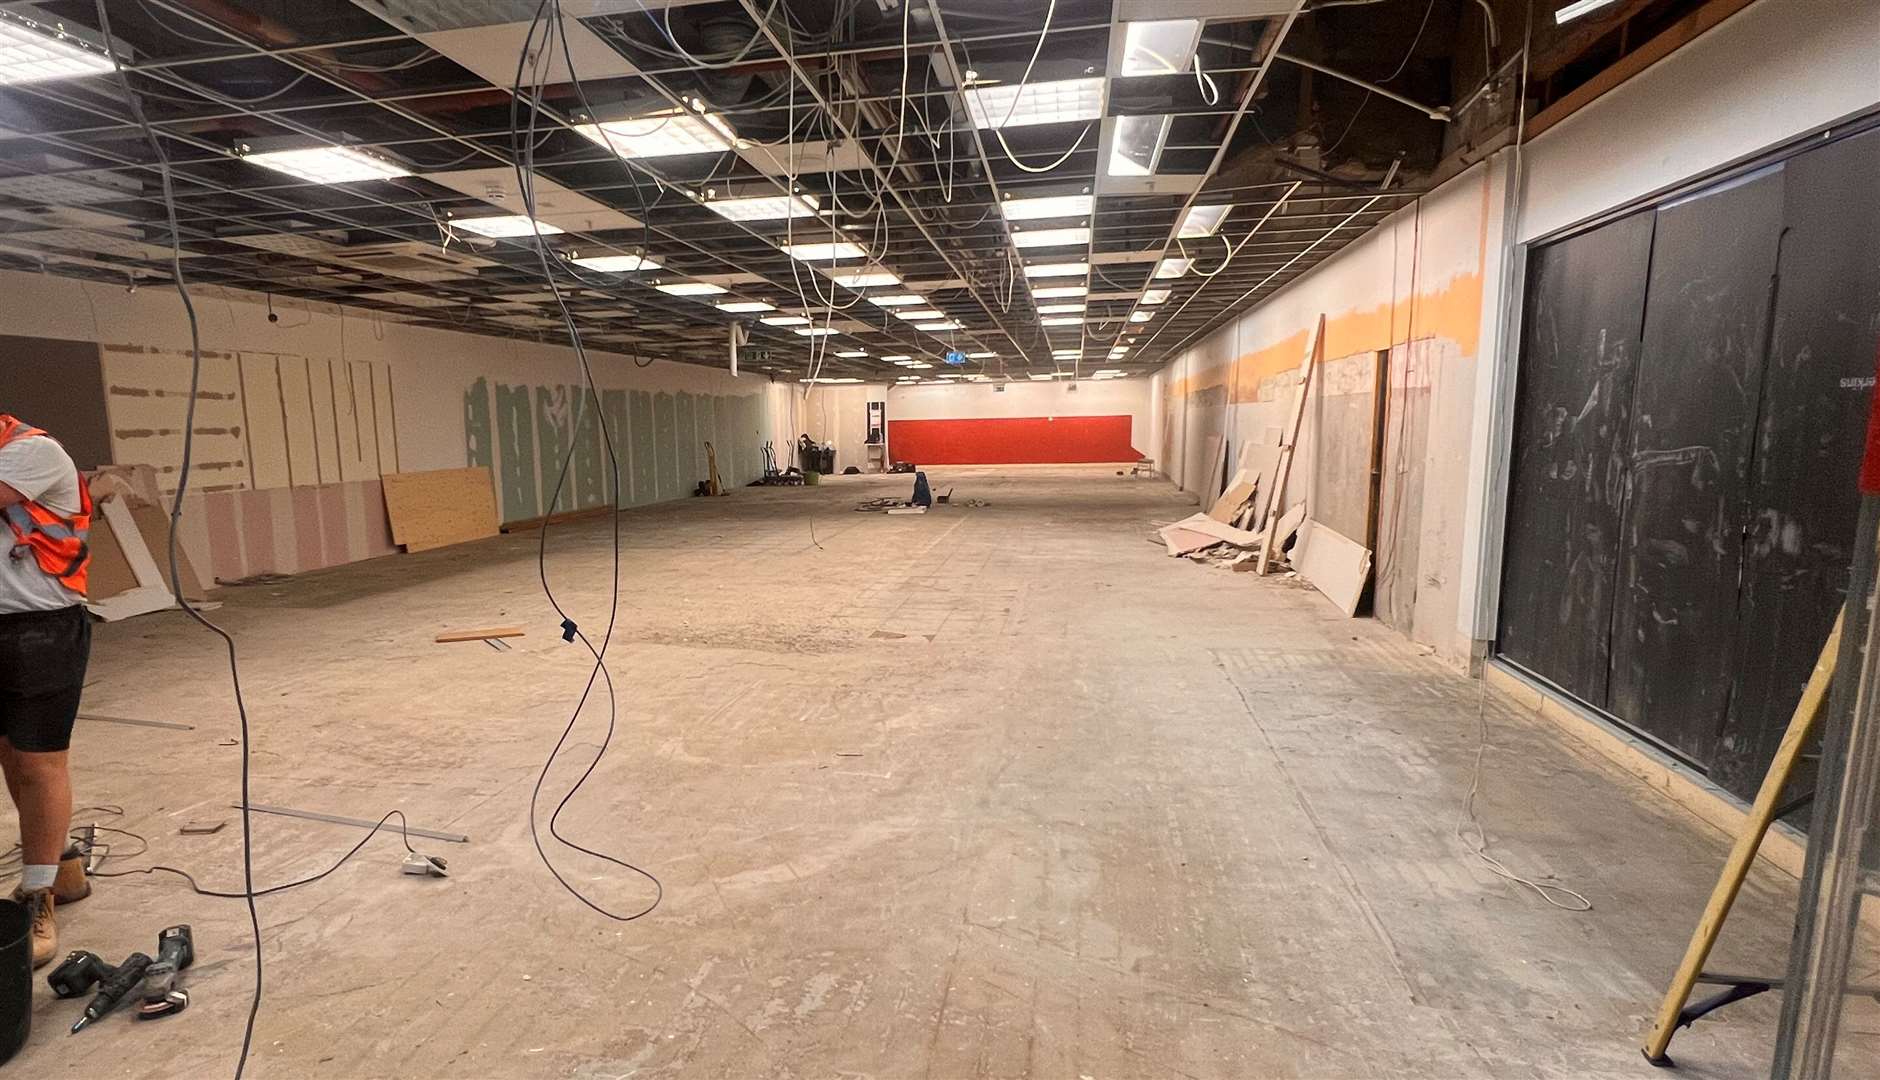 The former Waterstones store in Ashford has been stripped out. Picture: Steve Salter